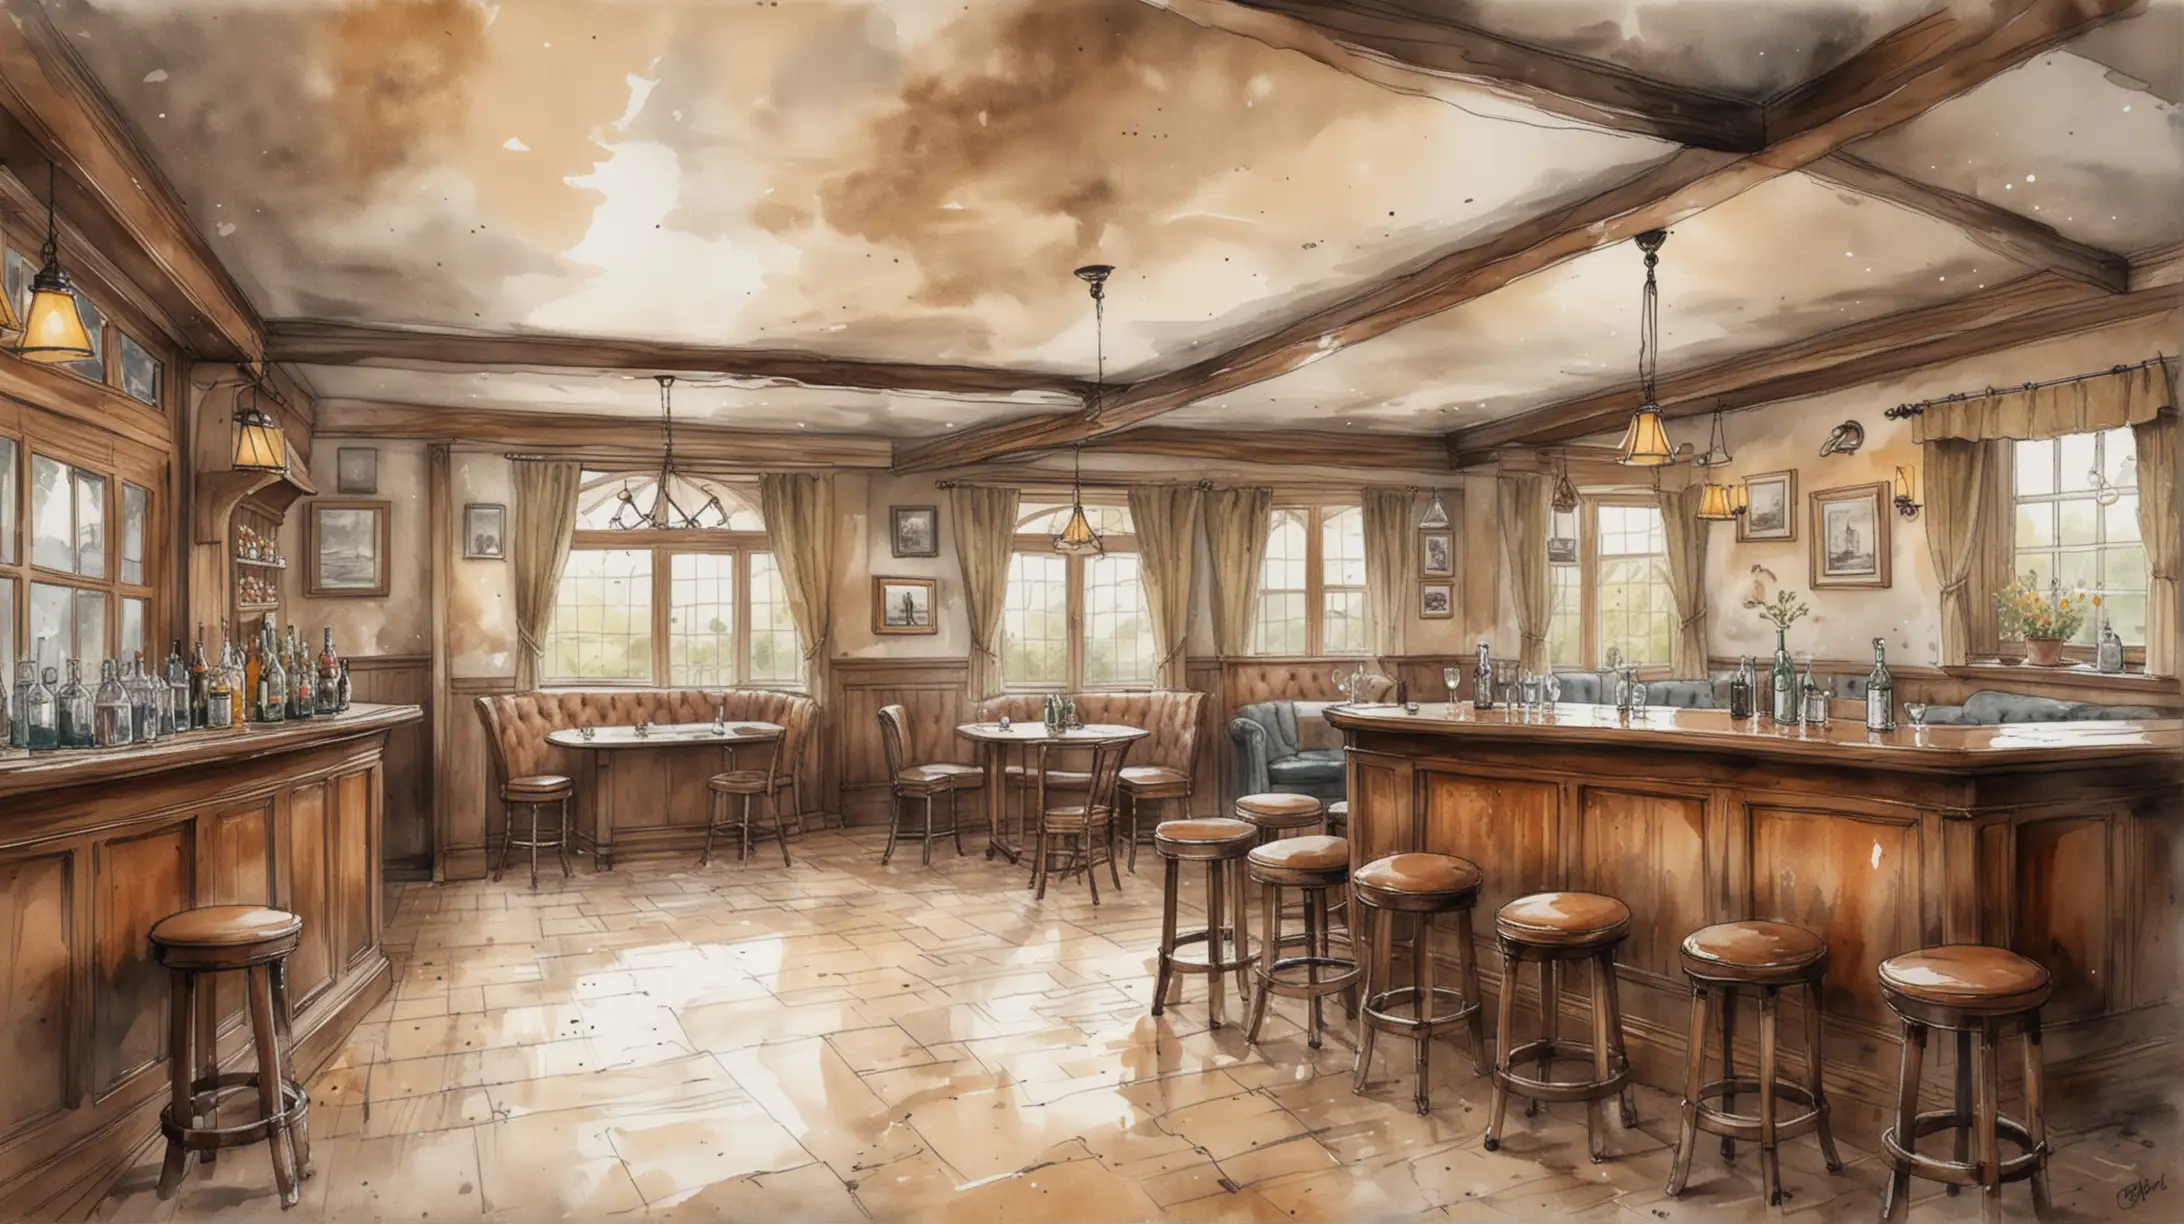 Internal traditional English country pub, set design sketch with water colors, smoke interior